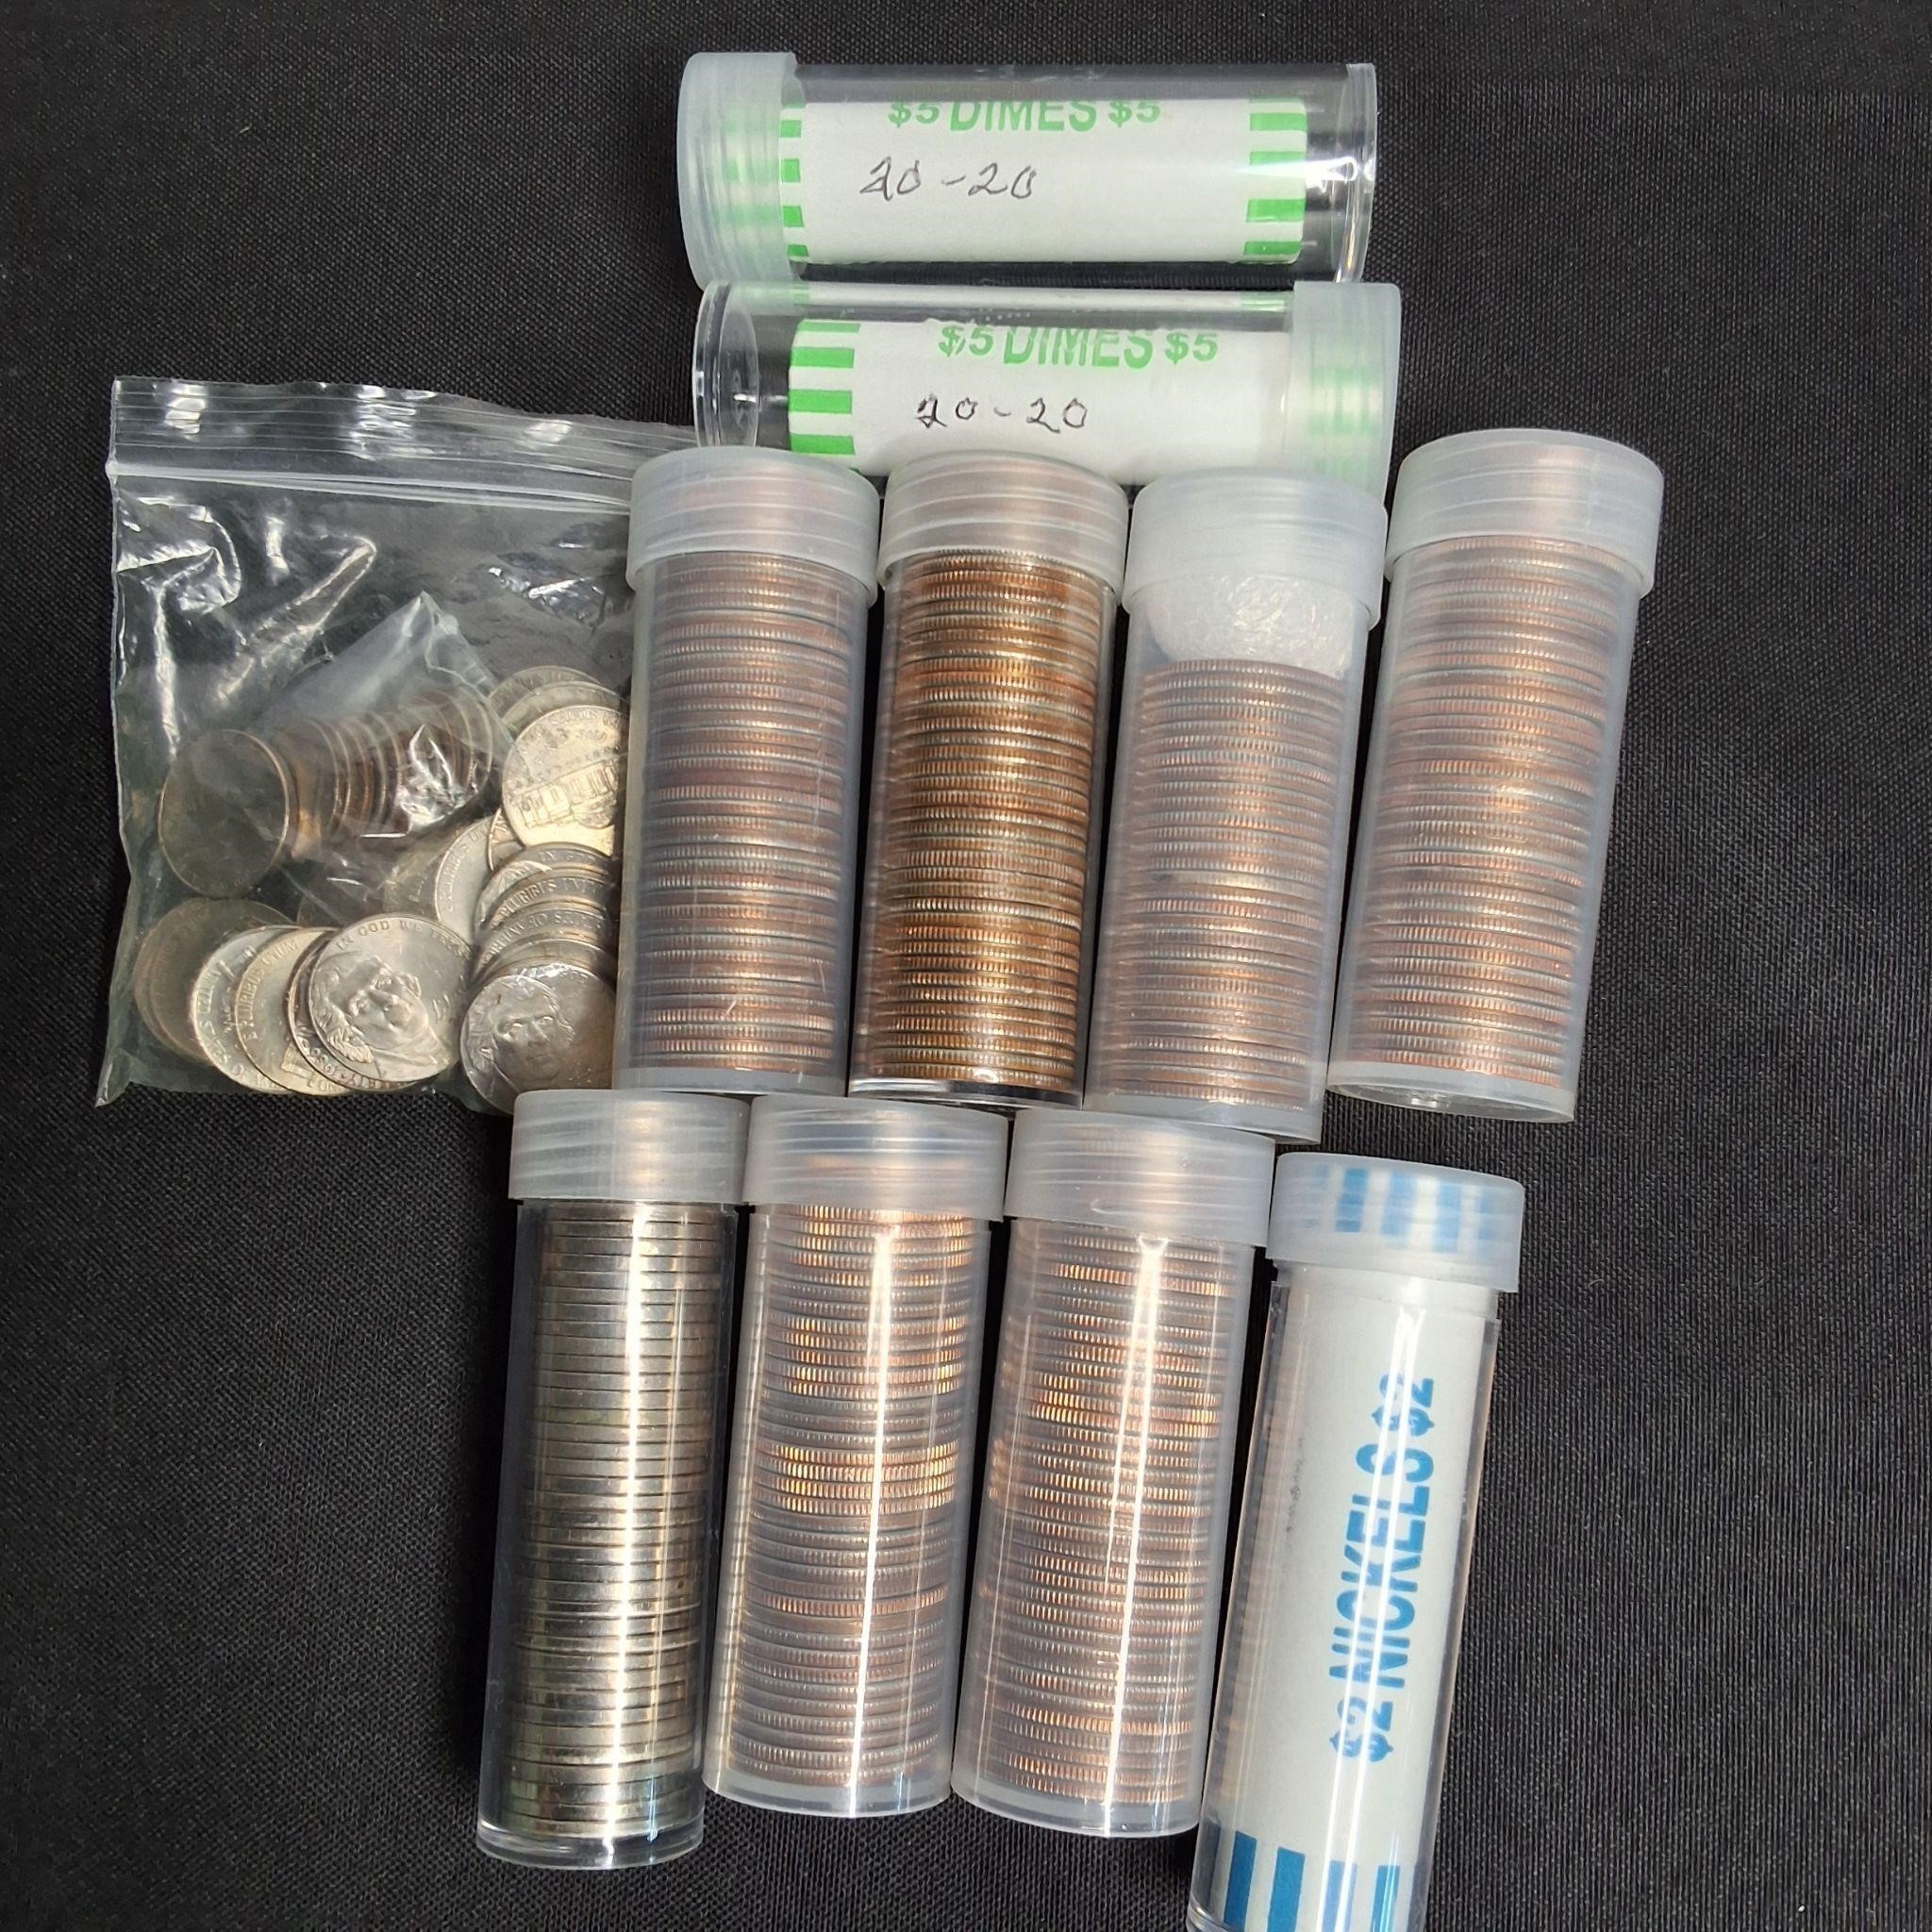 APPROXIMATELY 75.00 IN U.S. COINS